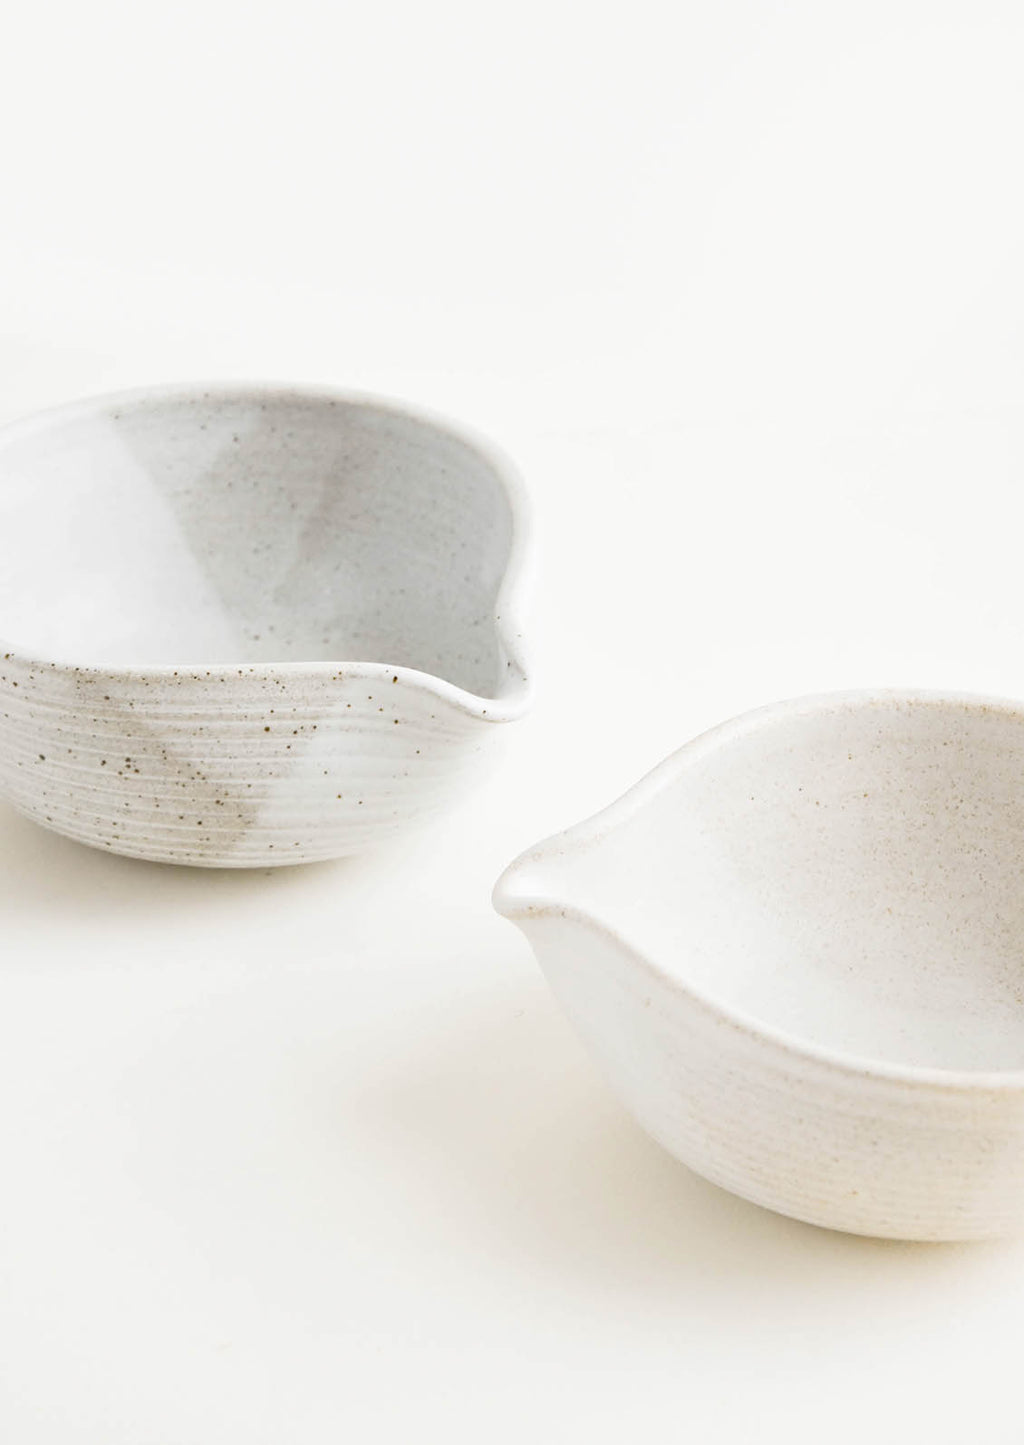 1: Two ceramic spouted bowls in different shades of white.